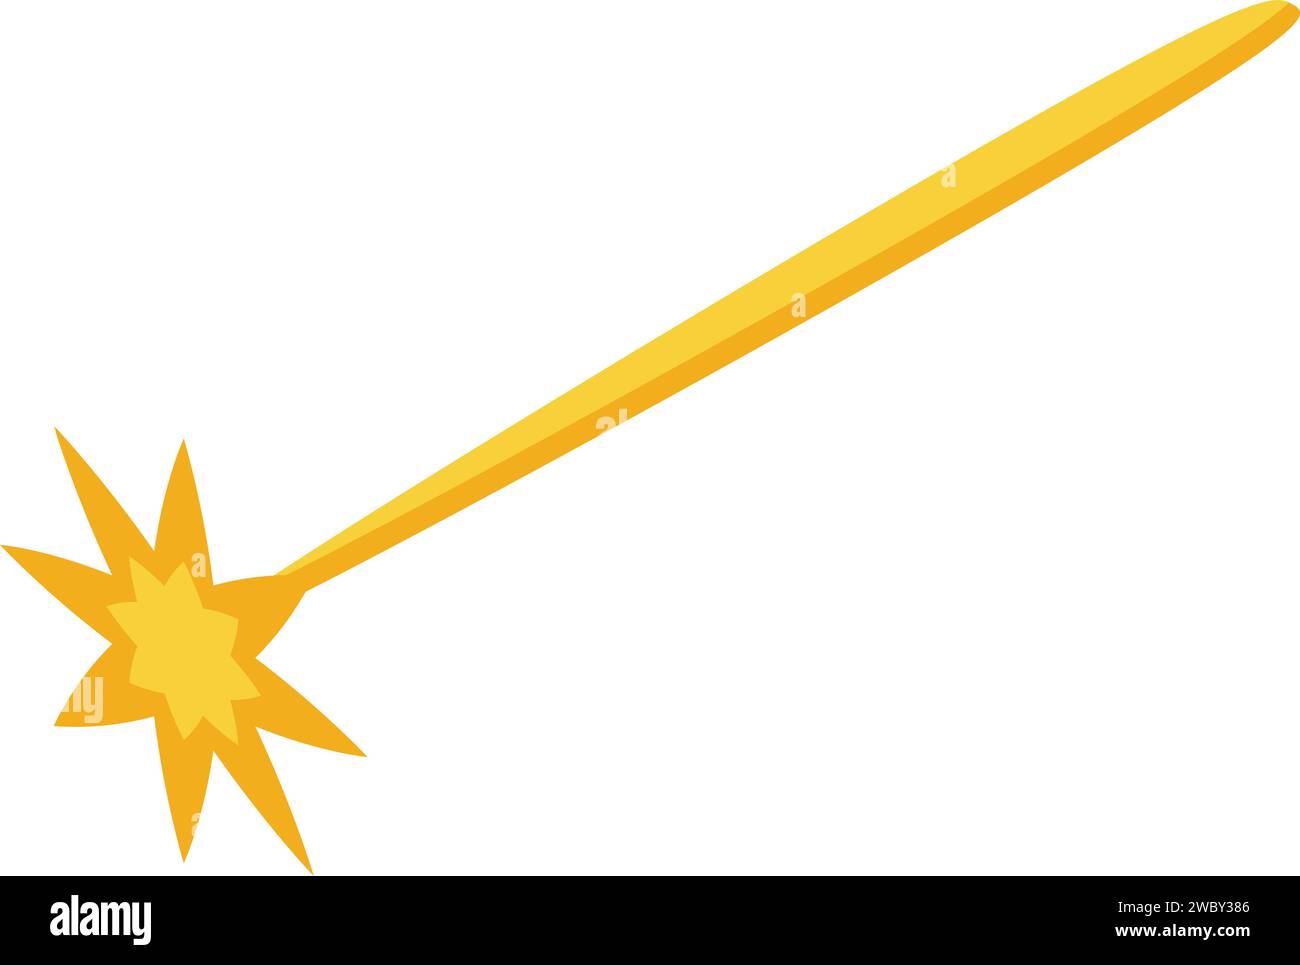 Fast laser shot icon isometric vector. Zap model. Phaser weapon Stock Vector